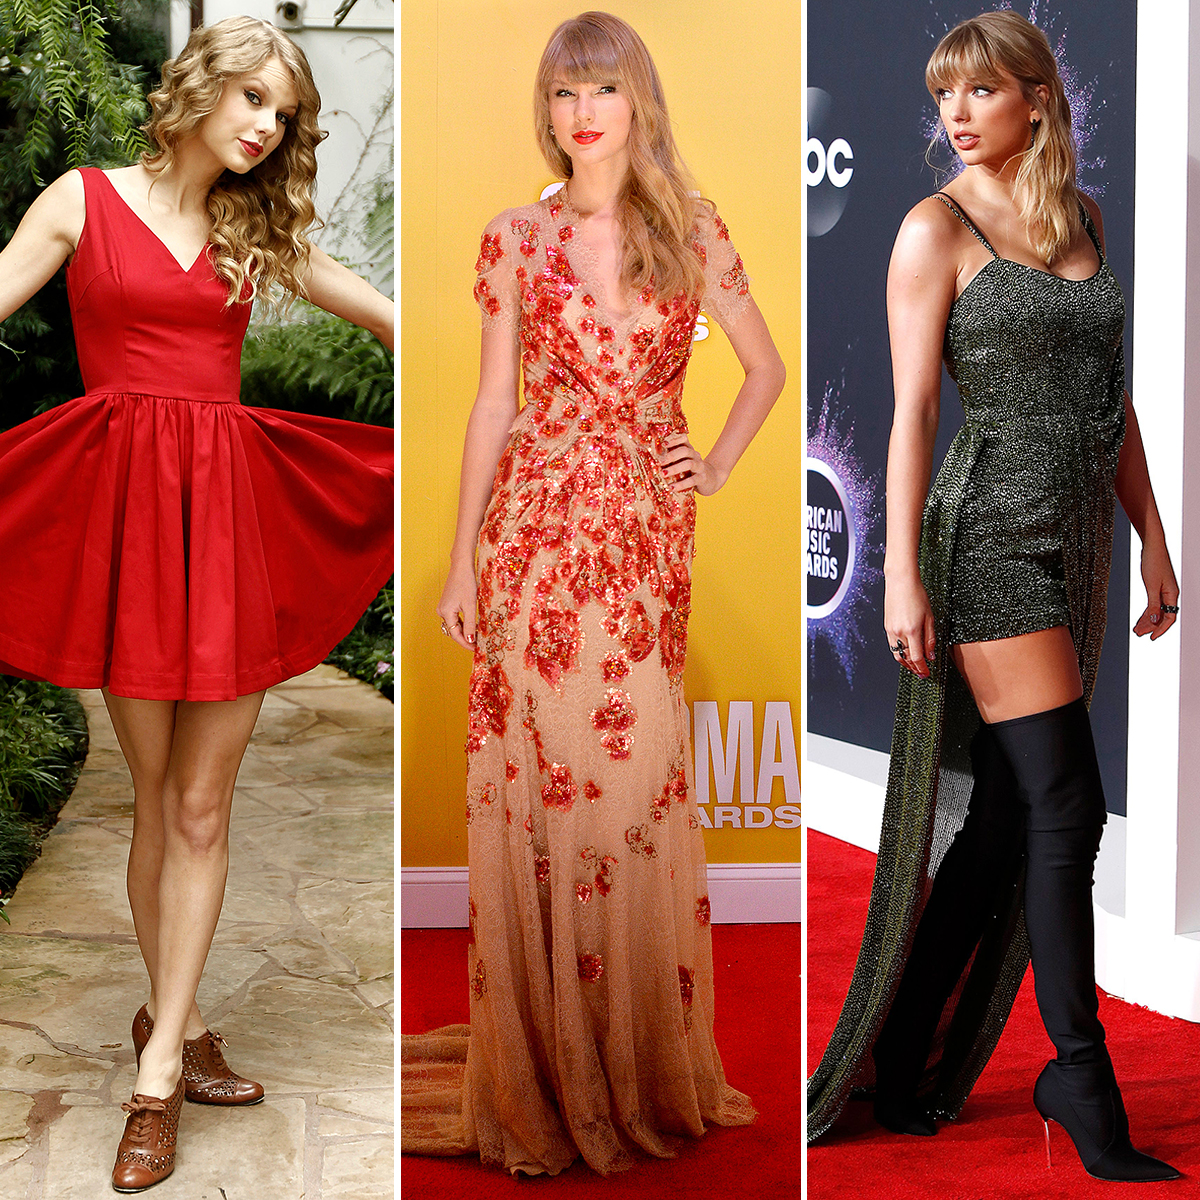 Taylor Swift's Best Fashion Looks Over the Years: See the Photos